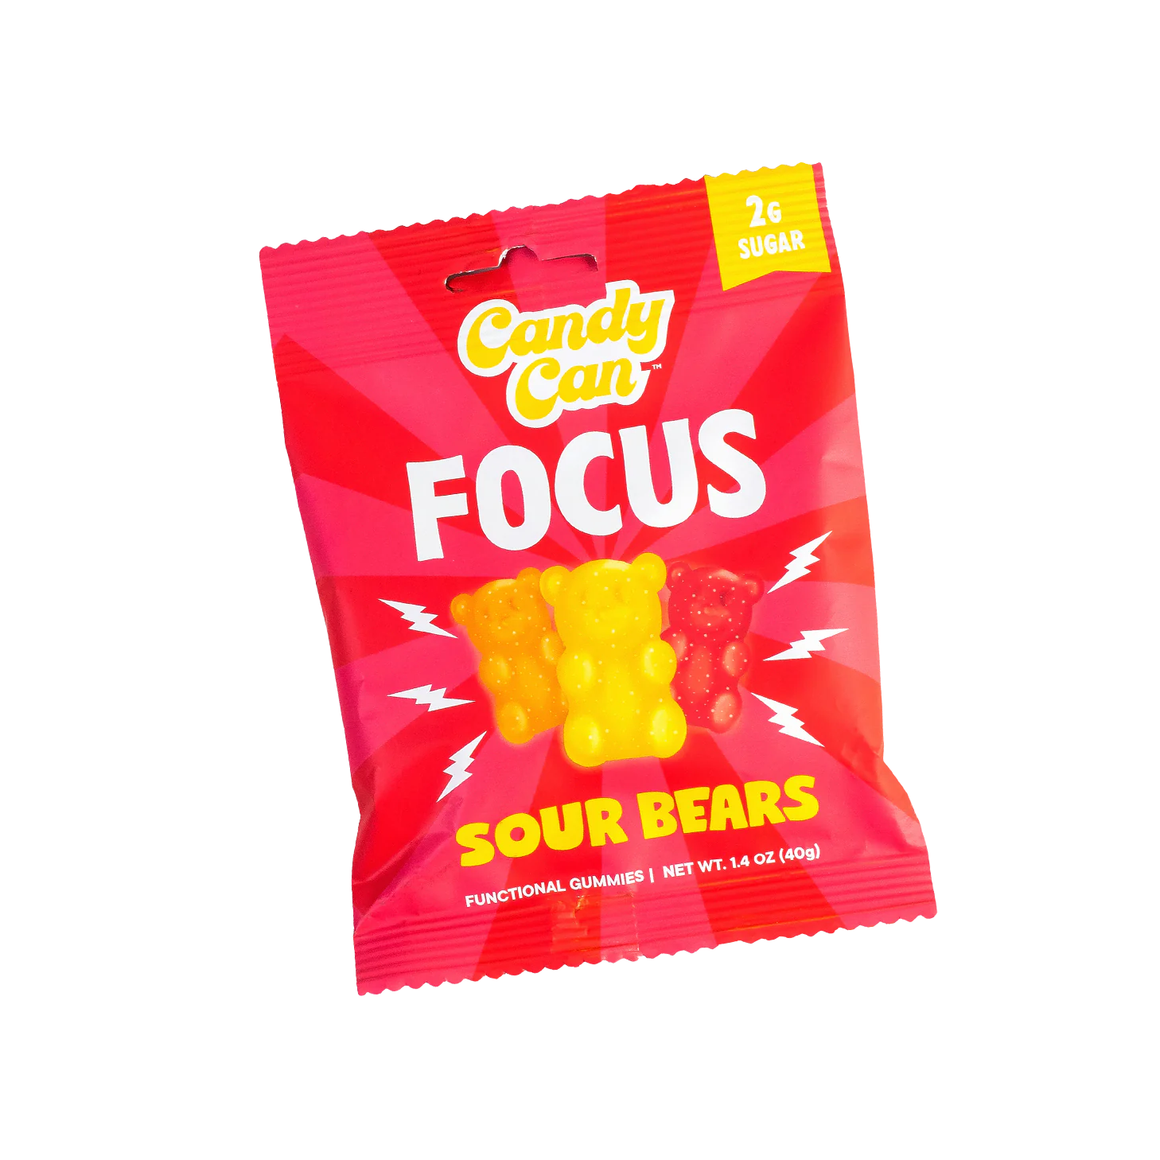 Candy Can - Functional Gummies - Focus Sour Bears - 1.4oz